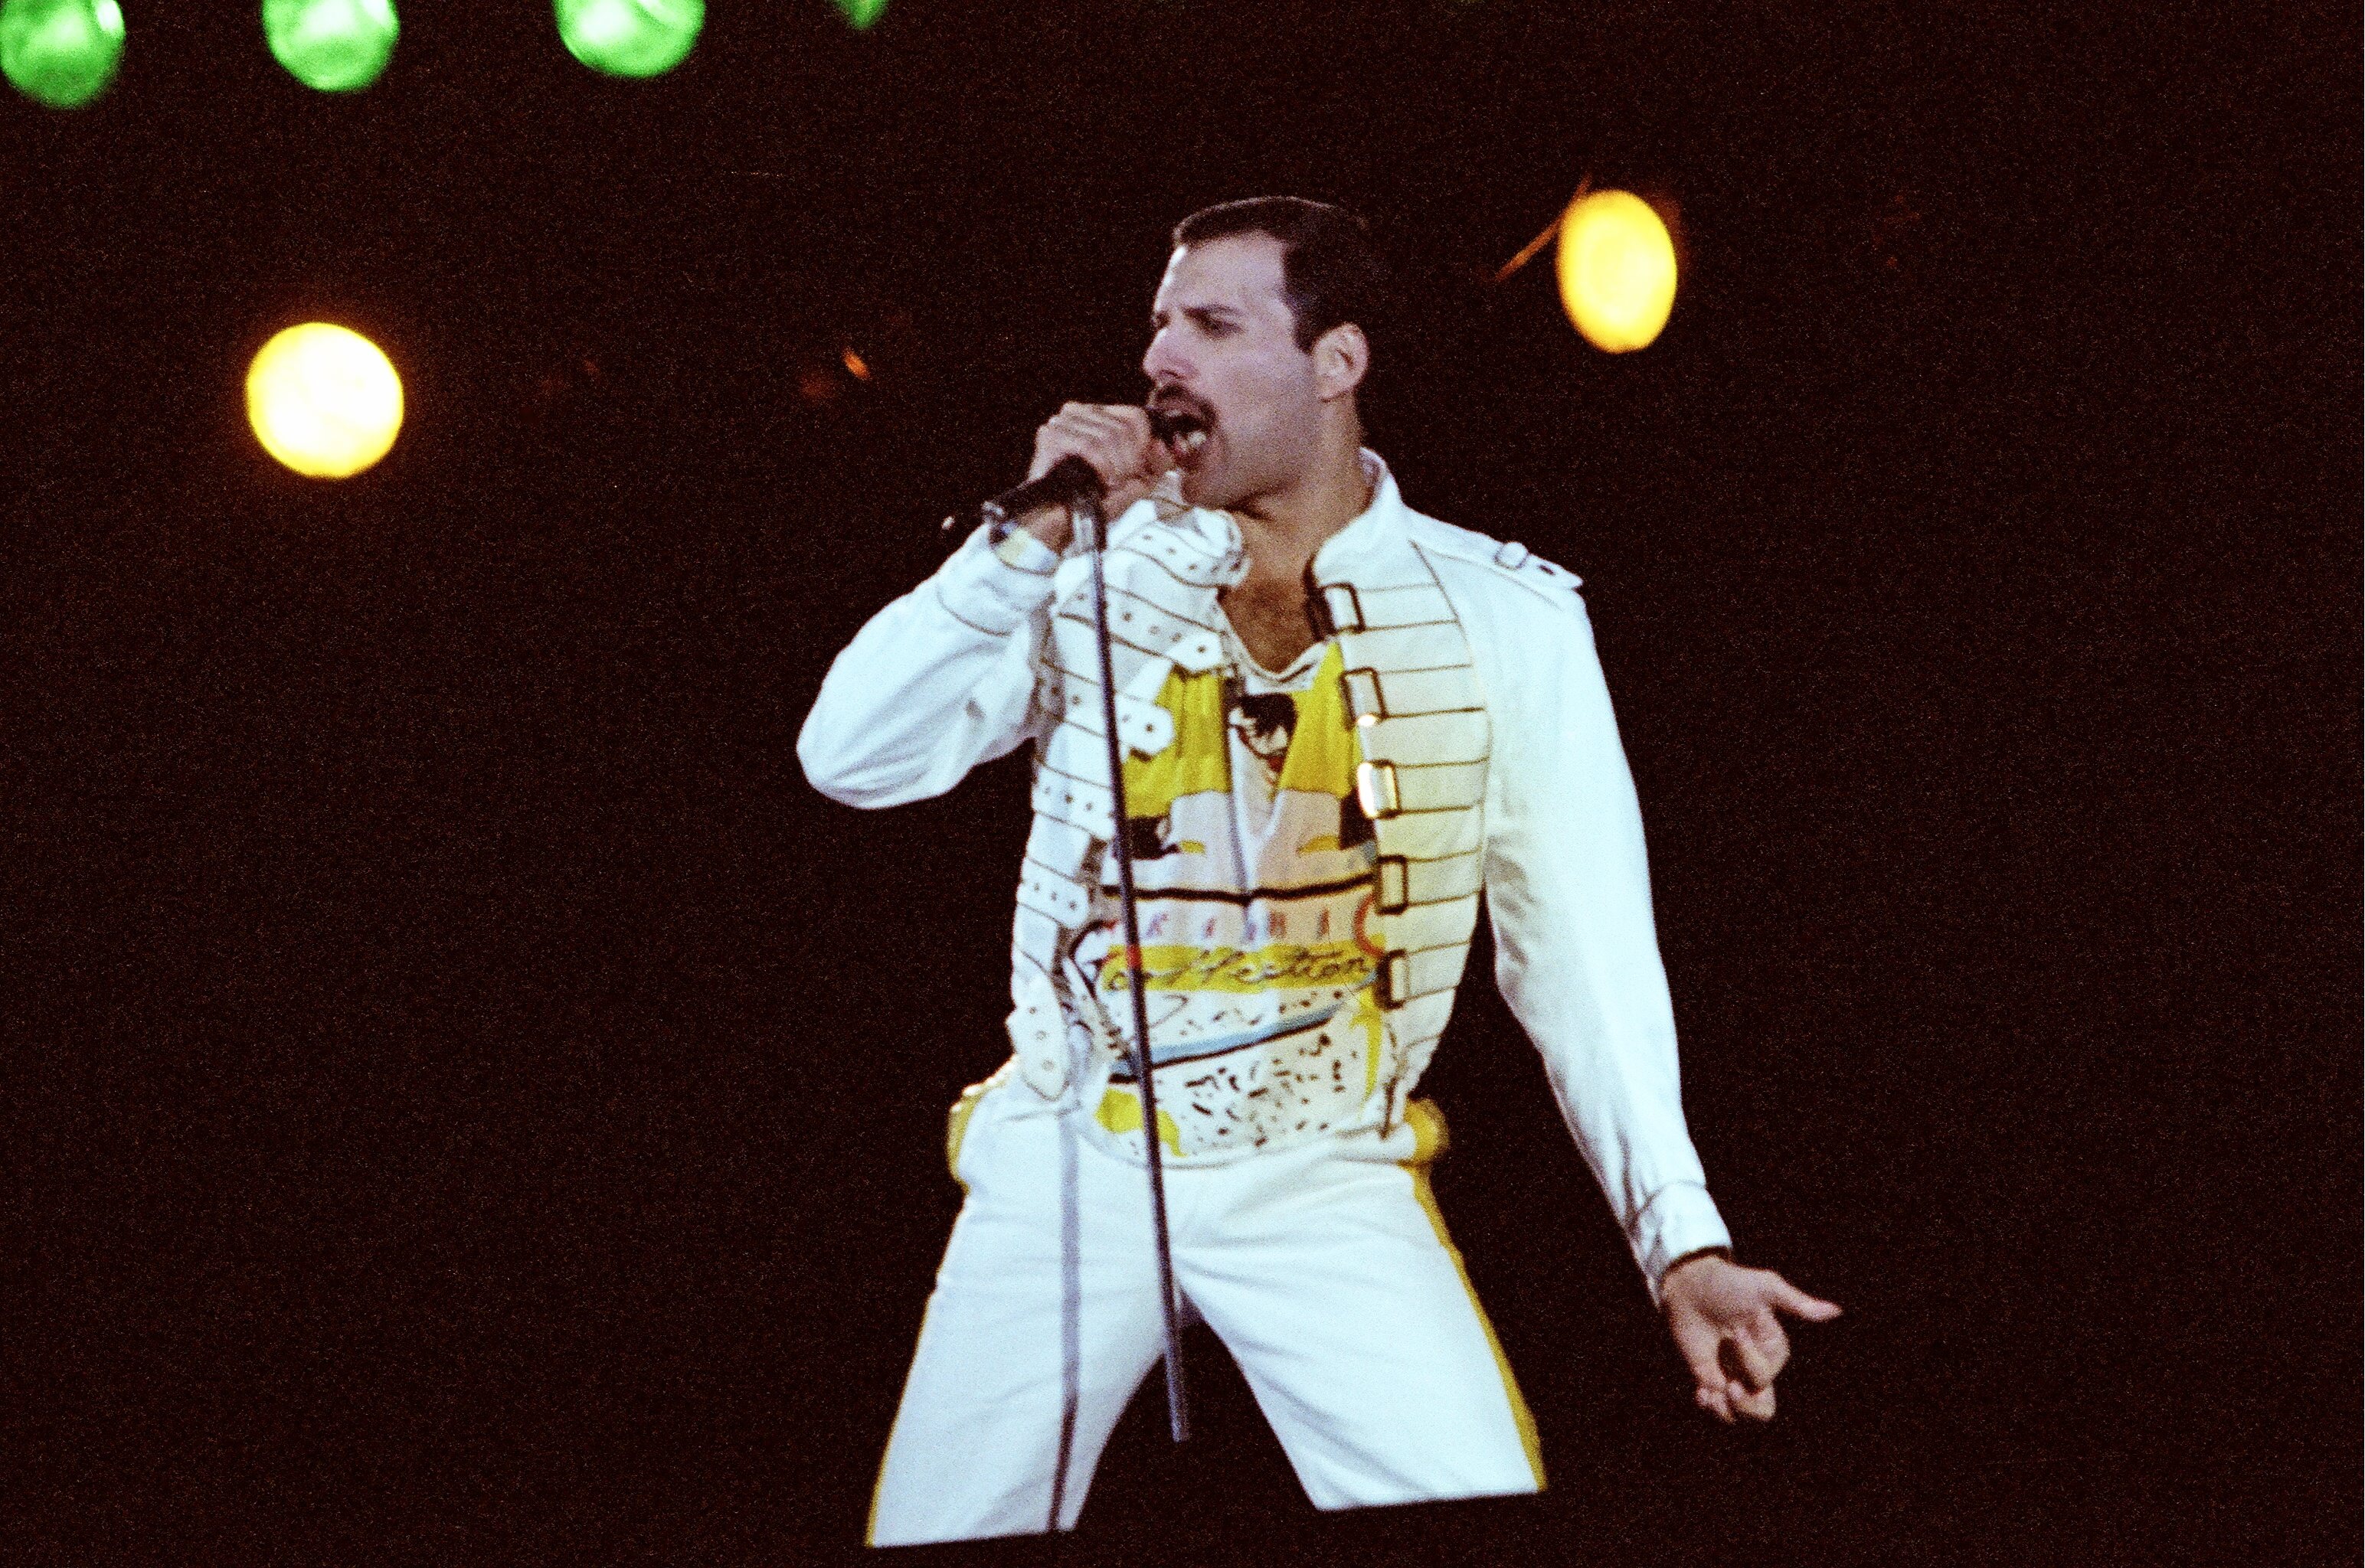 Queen's Freddie Mercury with a microphone during the "Somebody to Love" era